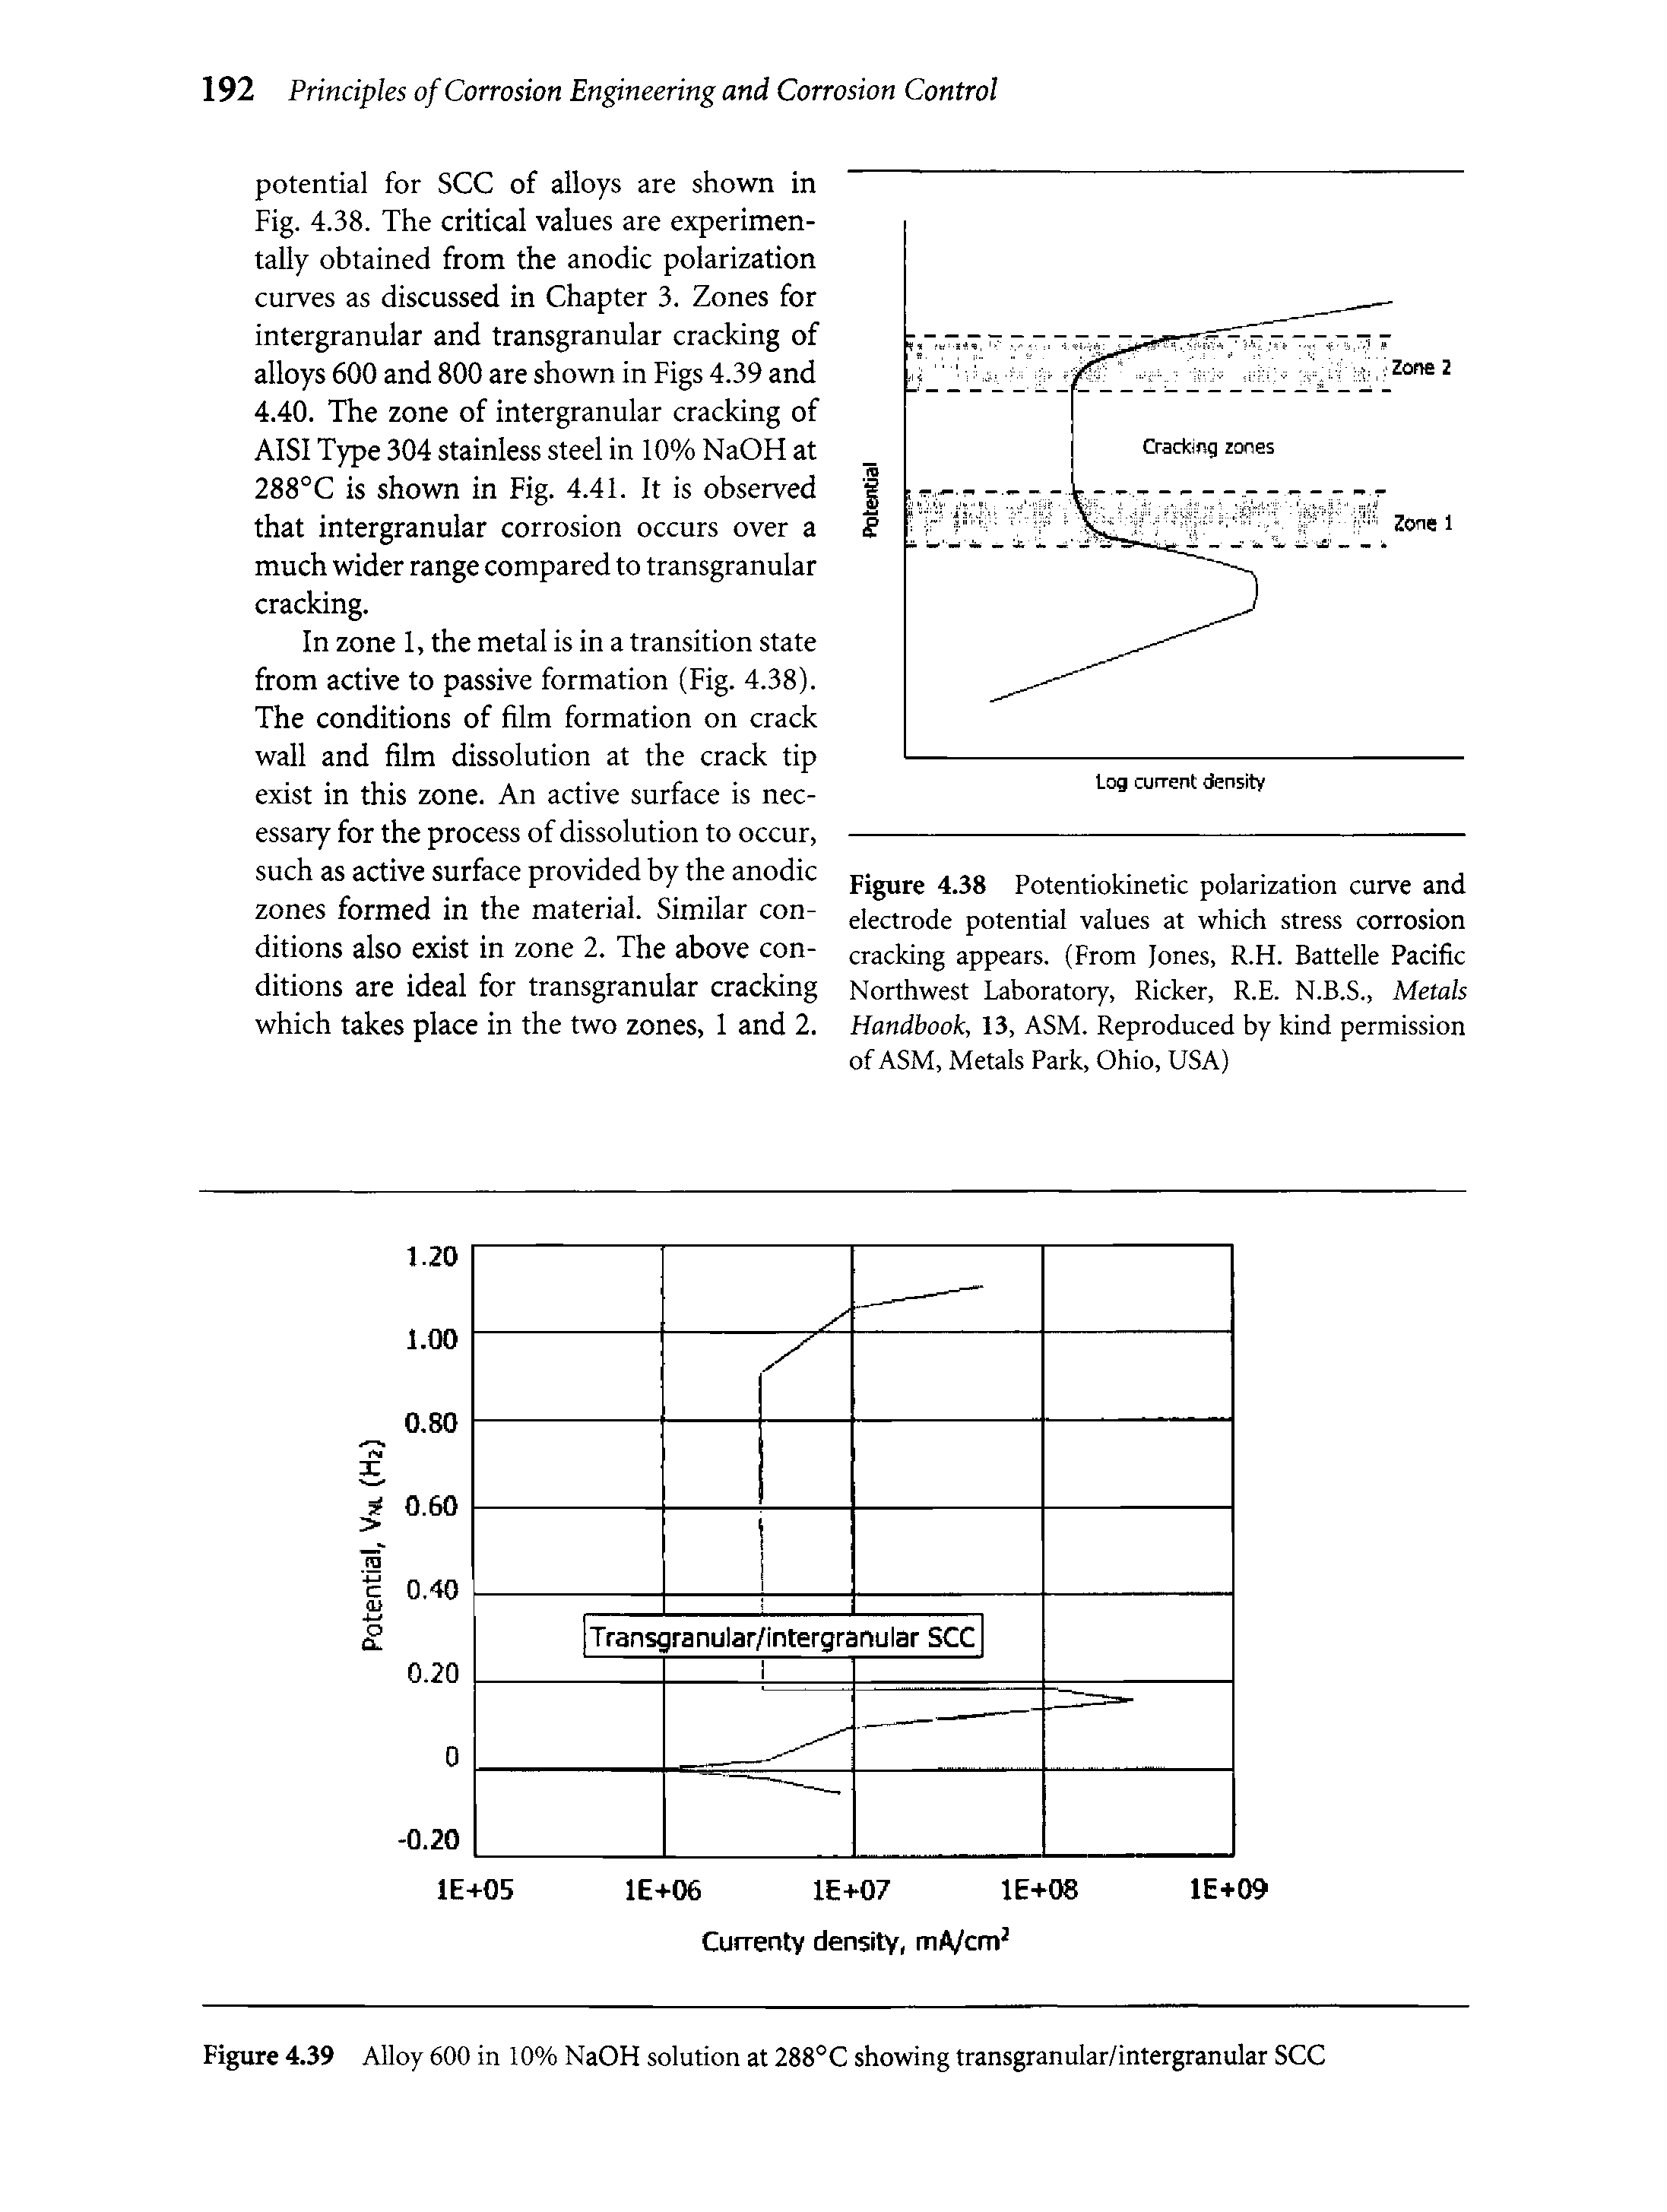 Figure 4.38 Potentiokinetic polarization curve and electrode potential values at which stress corrosion cracking appears. (From Jones, R.H. BatteUe Pacific Northwest Laboratory, Ricker, R.E. N.B.S., Metals Handbook, 13, ASM. Reproduced by kind permission of ASM, Metals Park, Ohio, USA)...